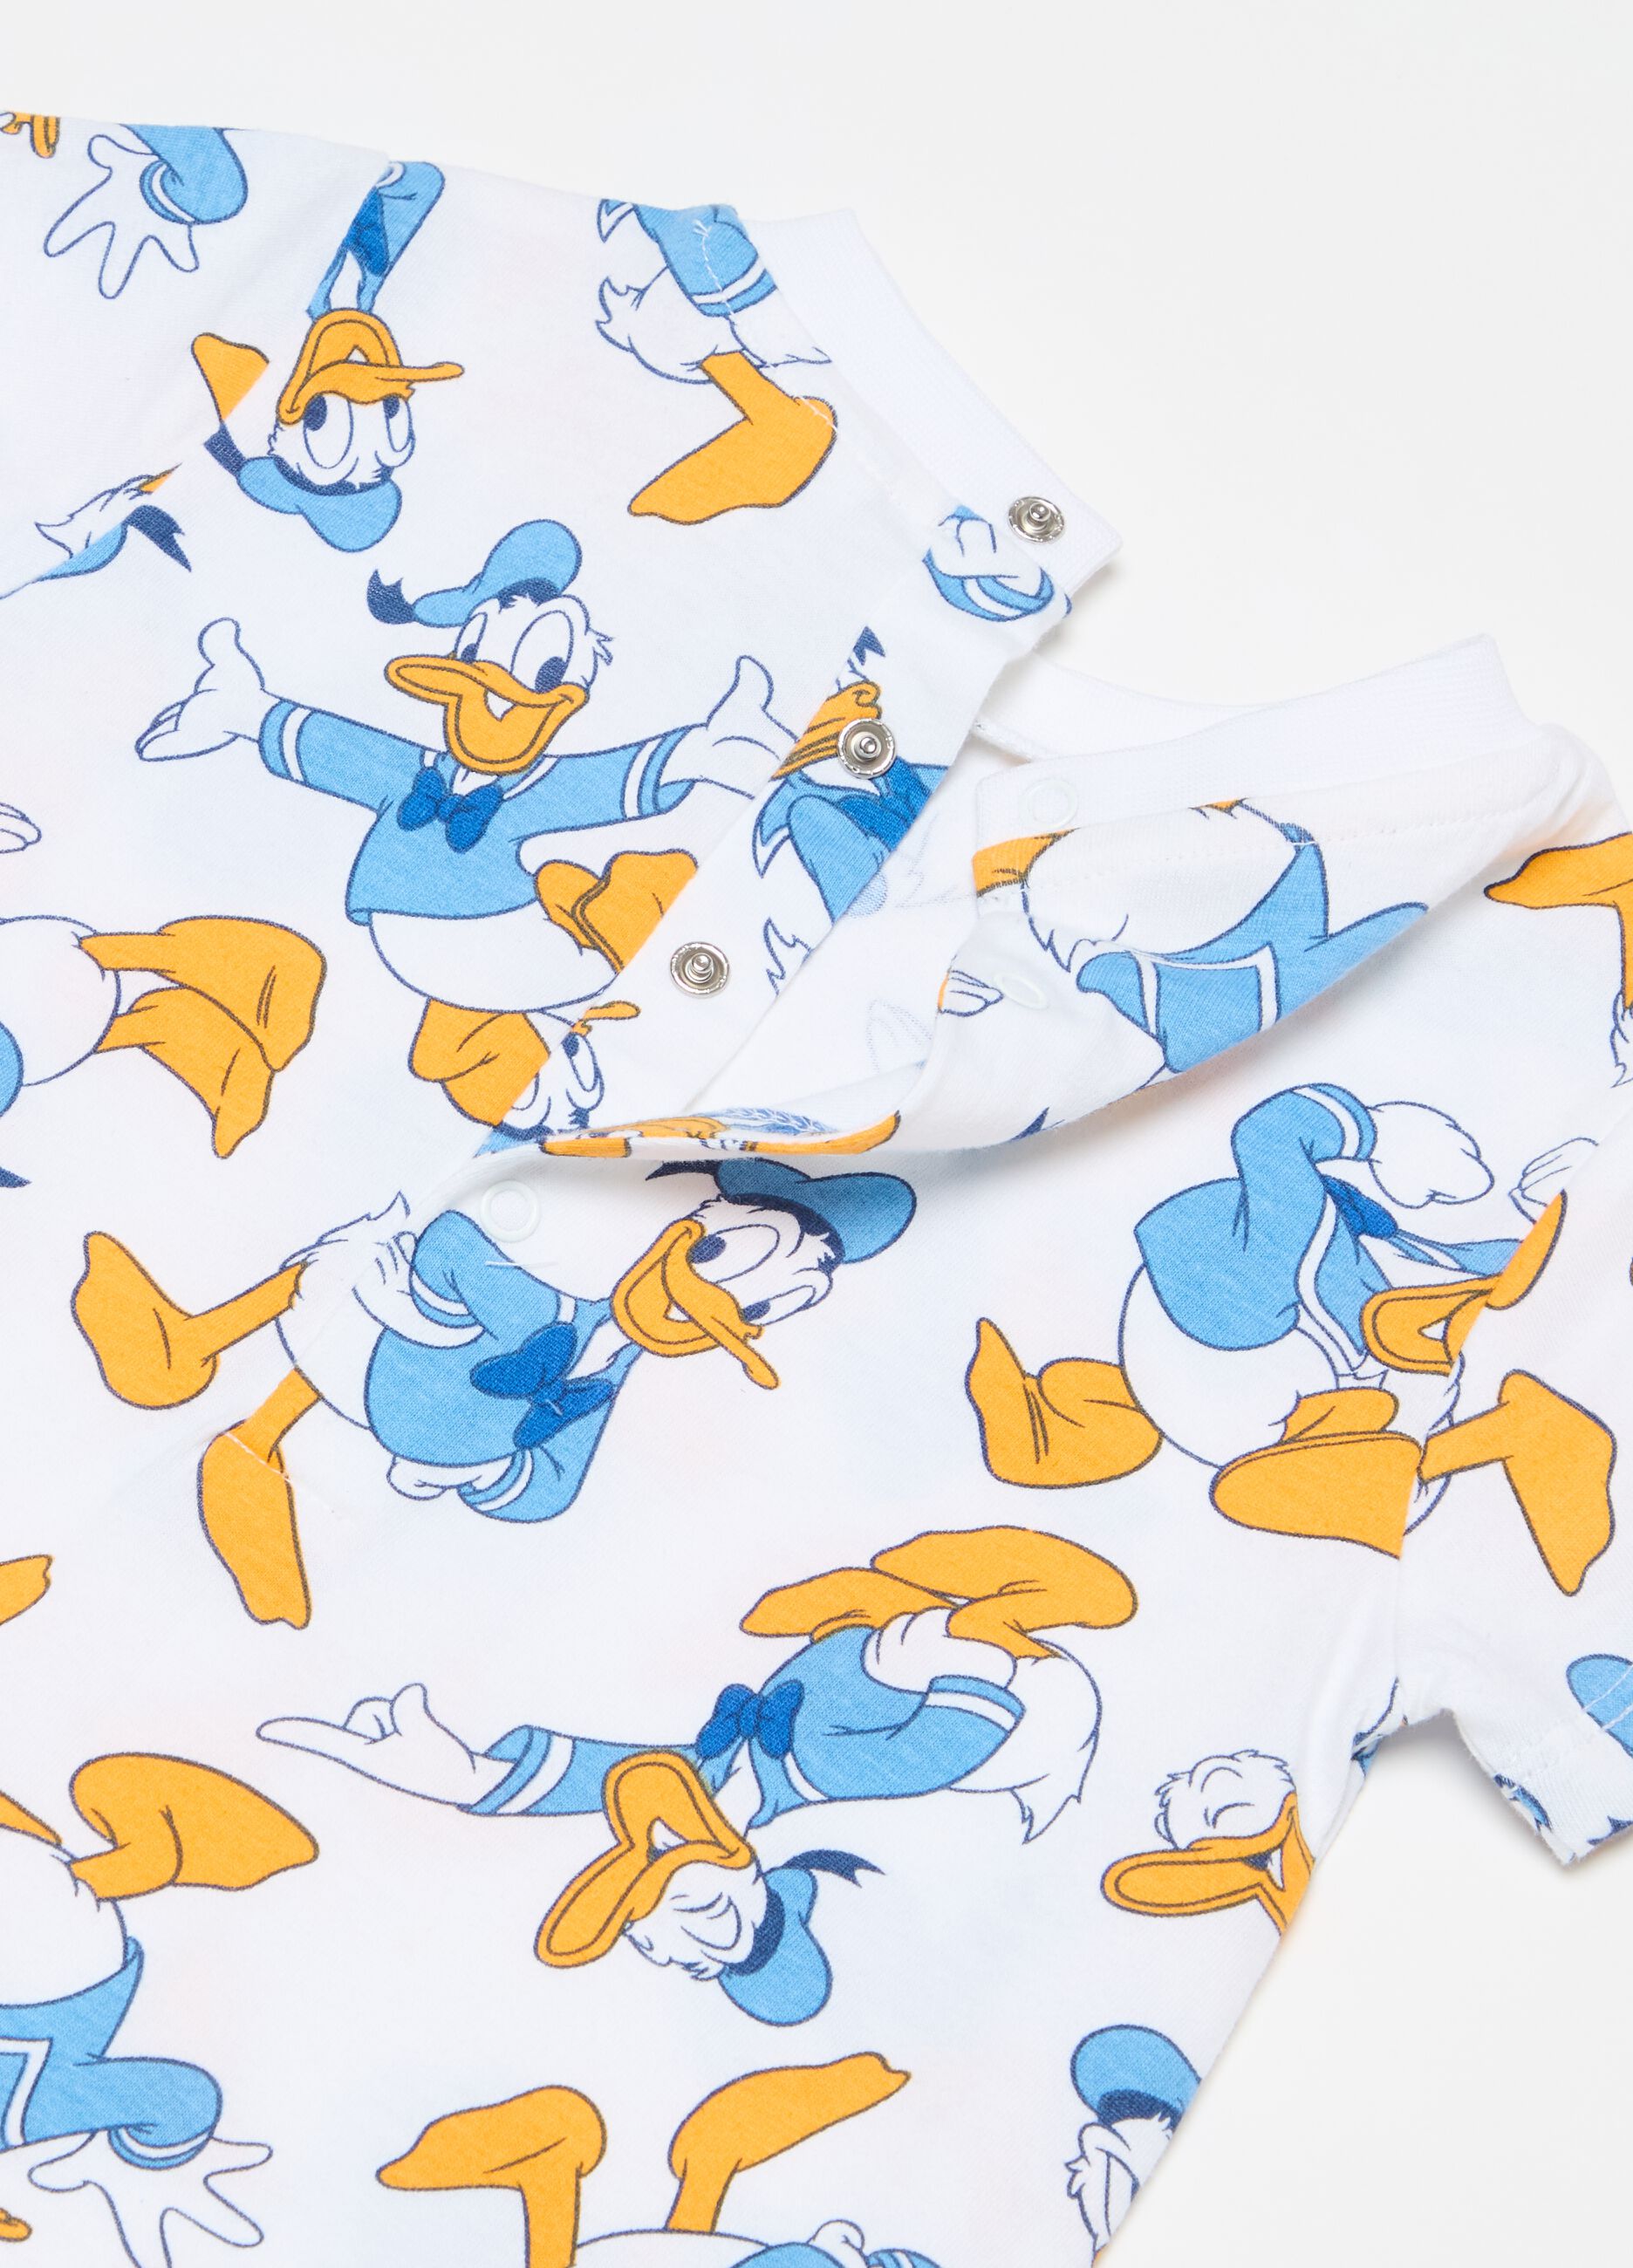 Two-pack Donald Duck 90 romper suits in organic cotton